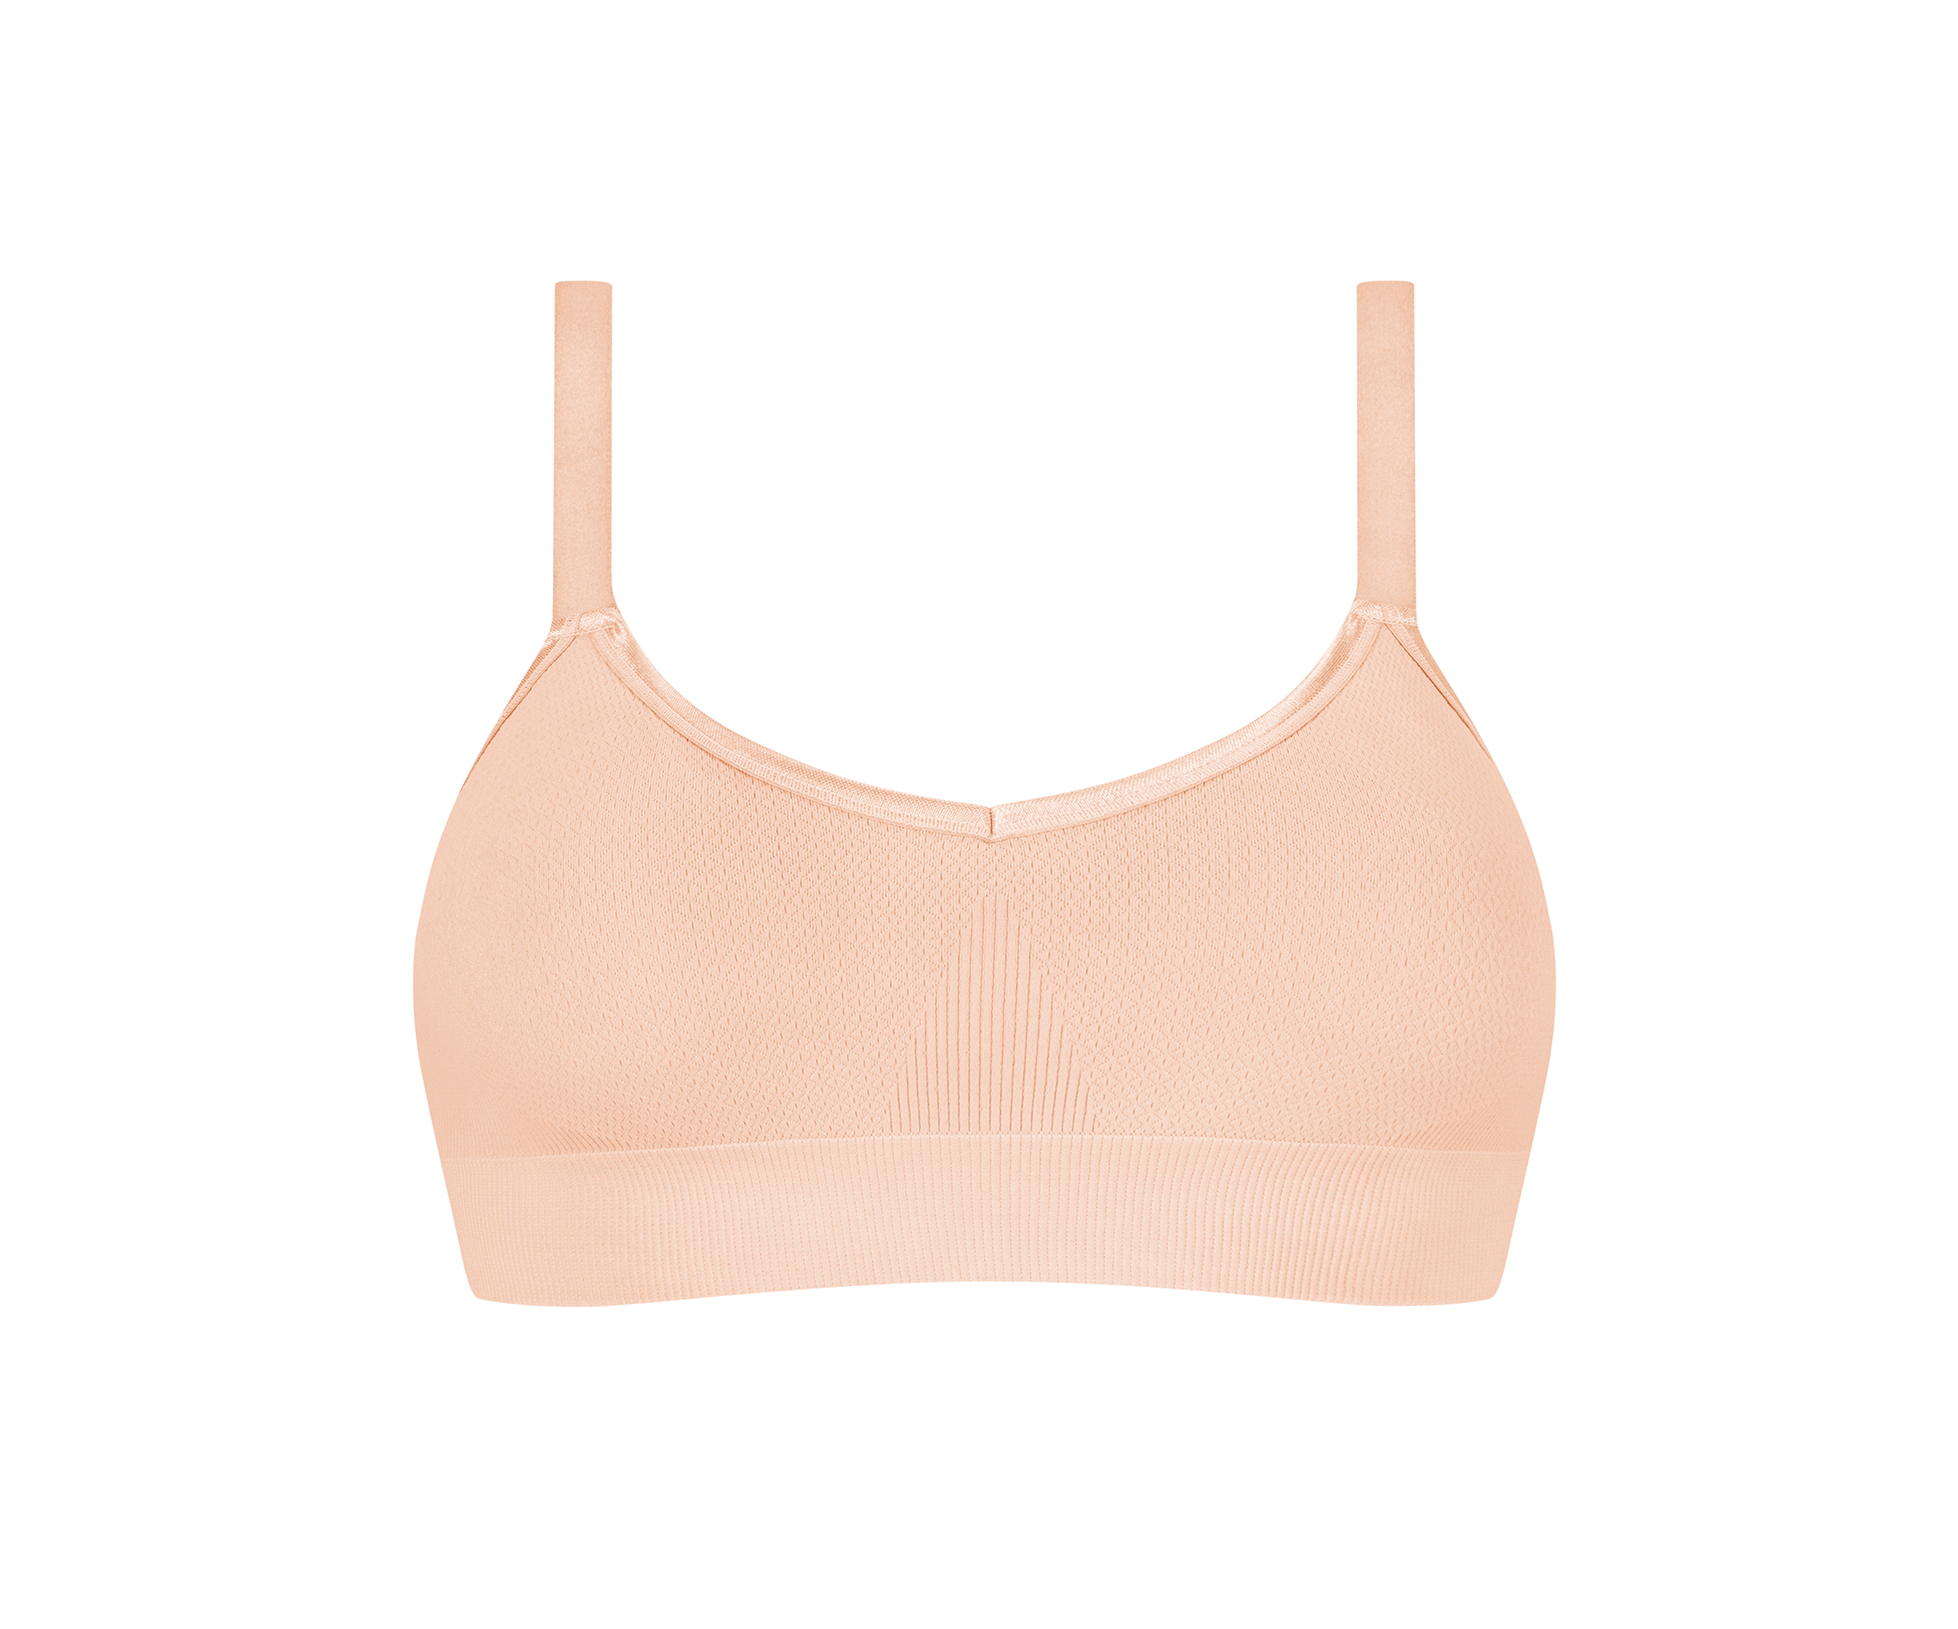 Amoena Leyla Front Fastening ~ Post Surgical ~ Soft Cup Bra